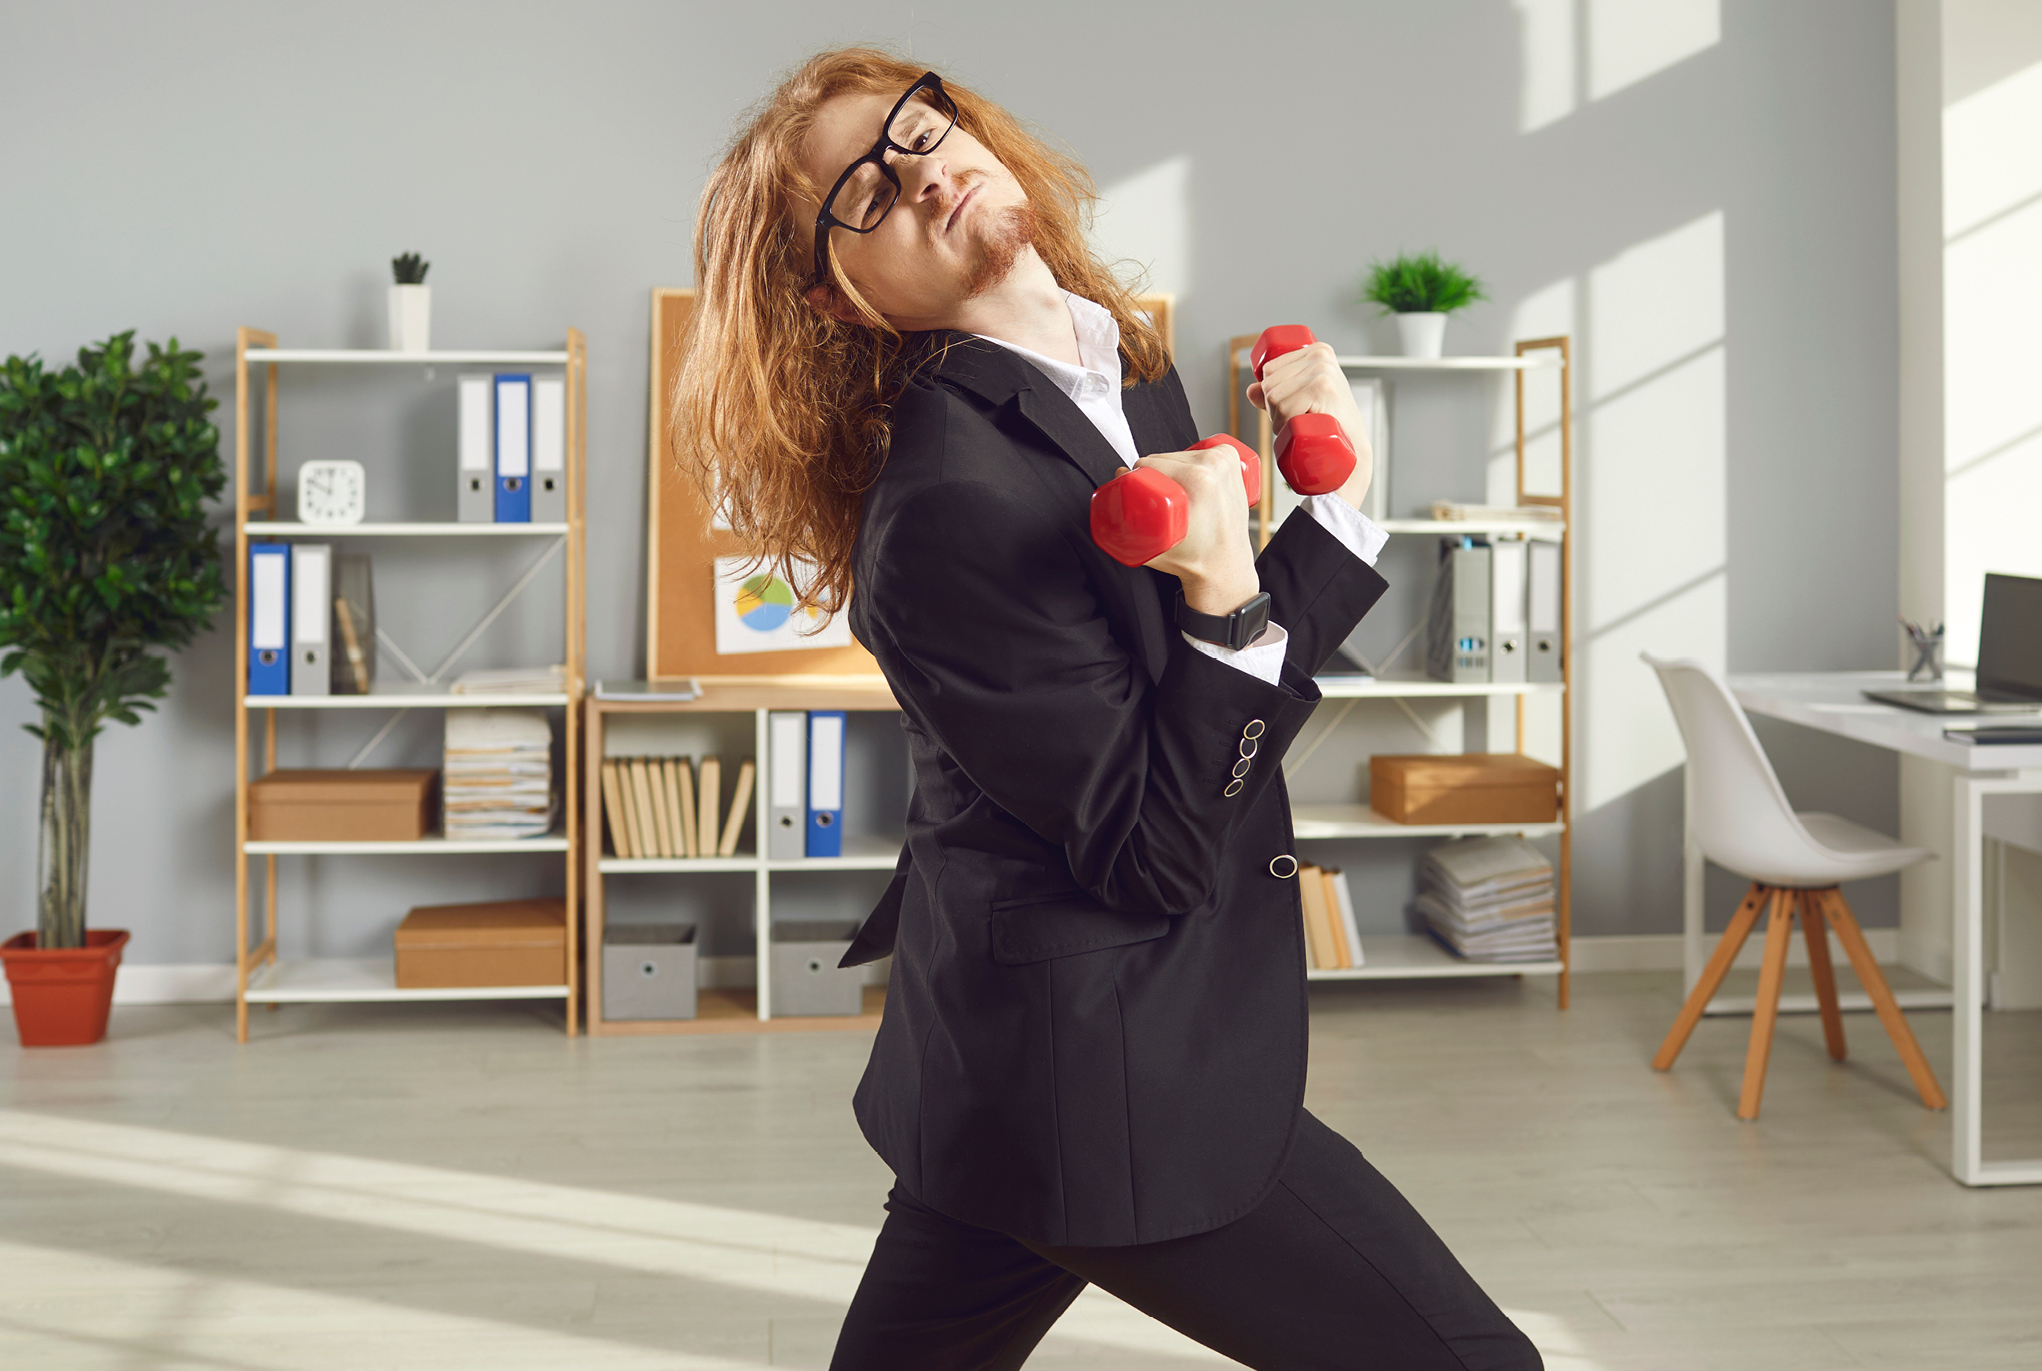 An employee wearing a business suit and glasses lifting weights